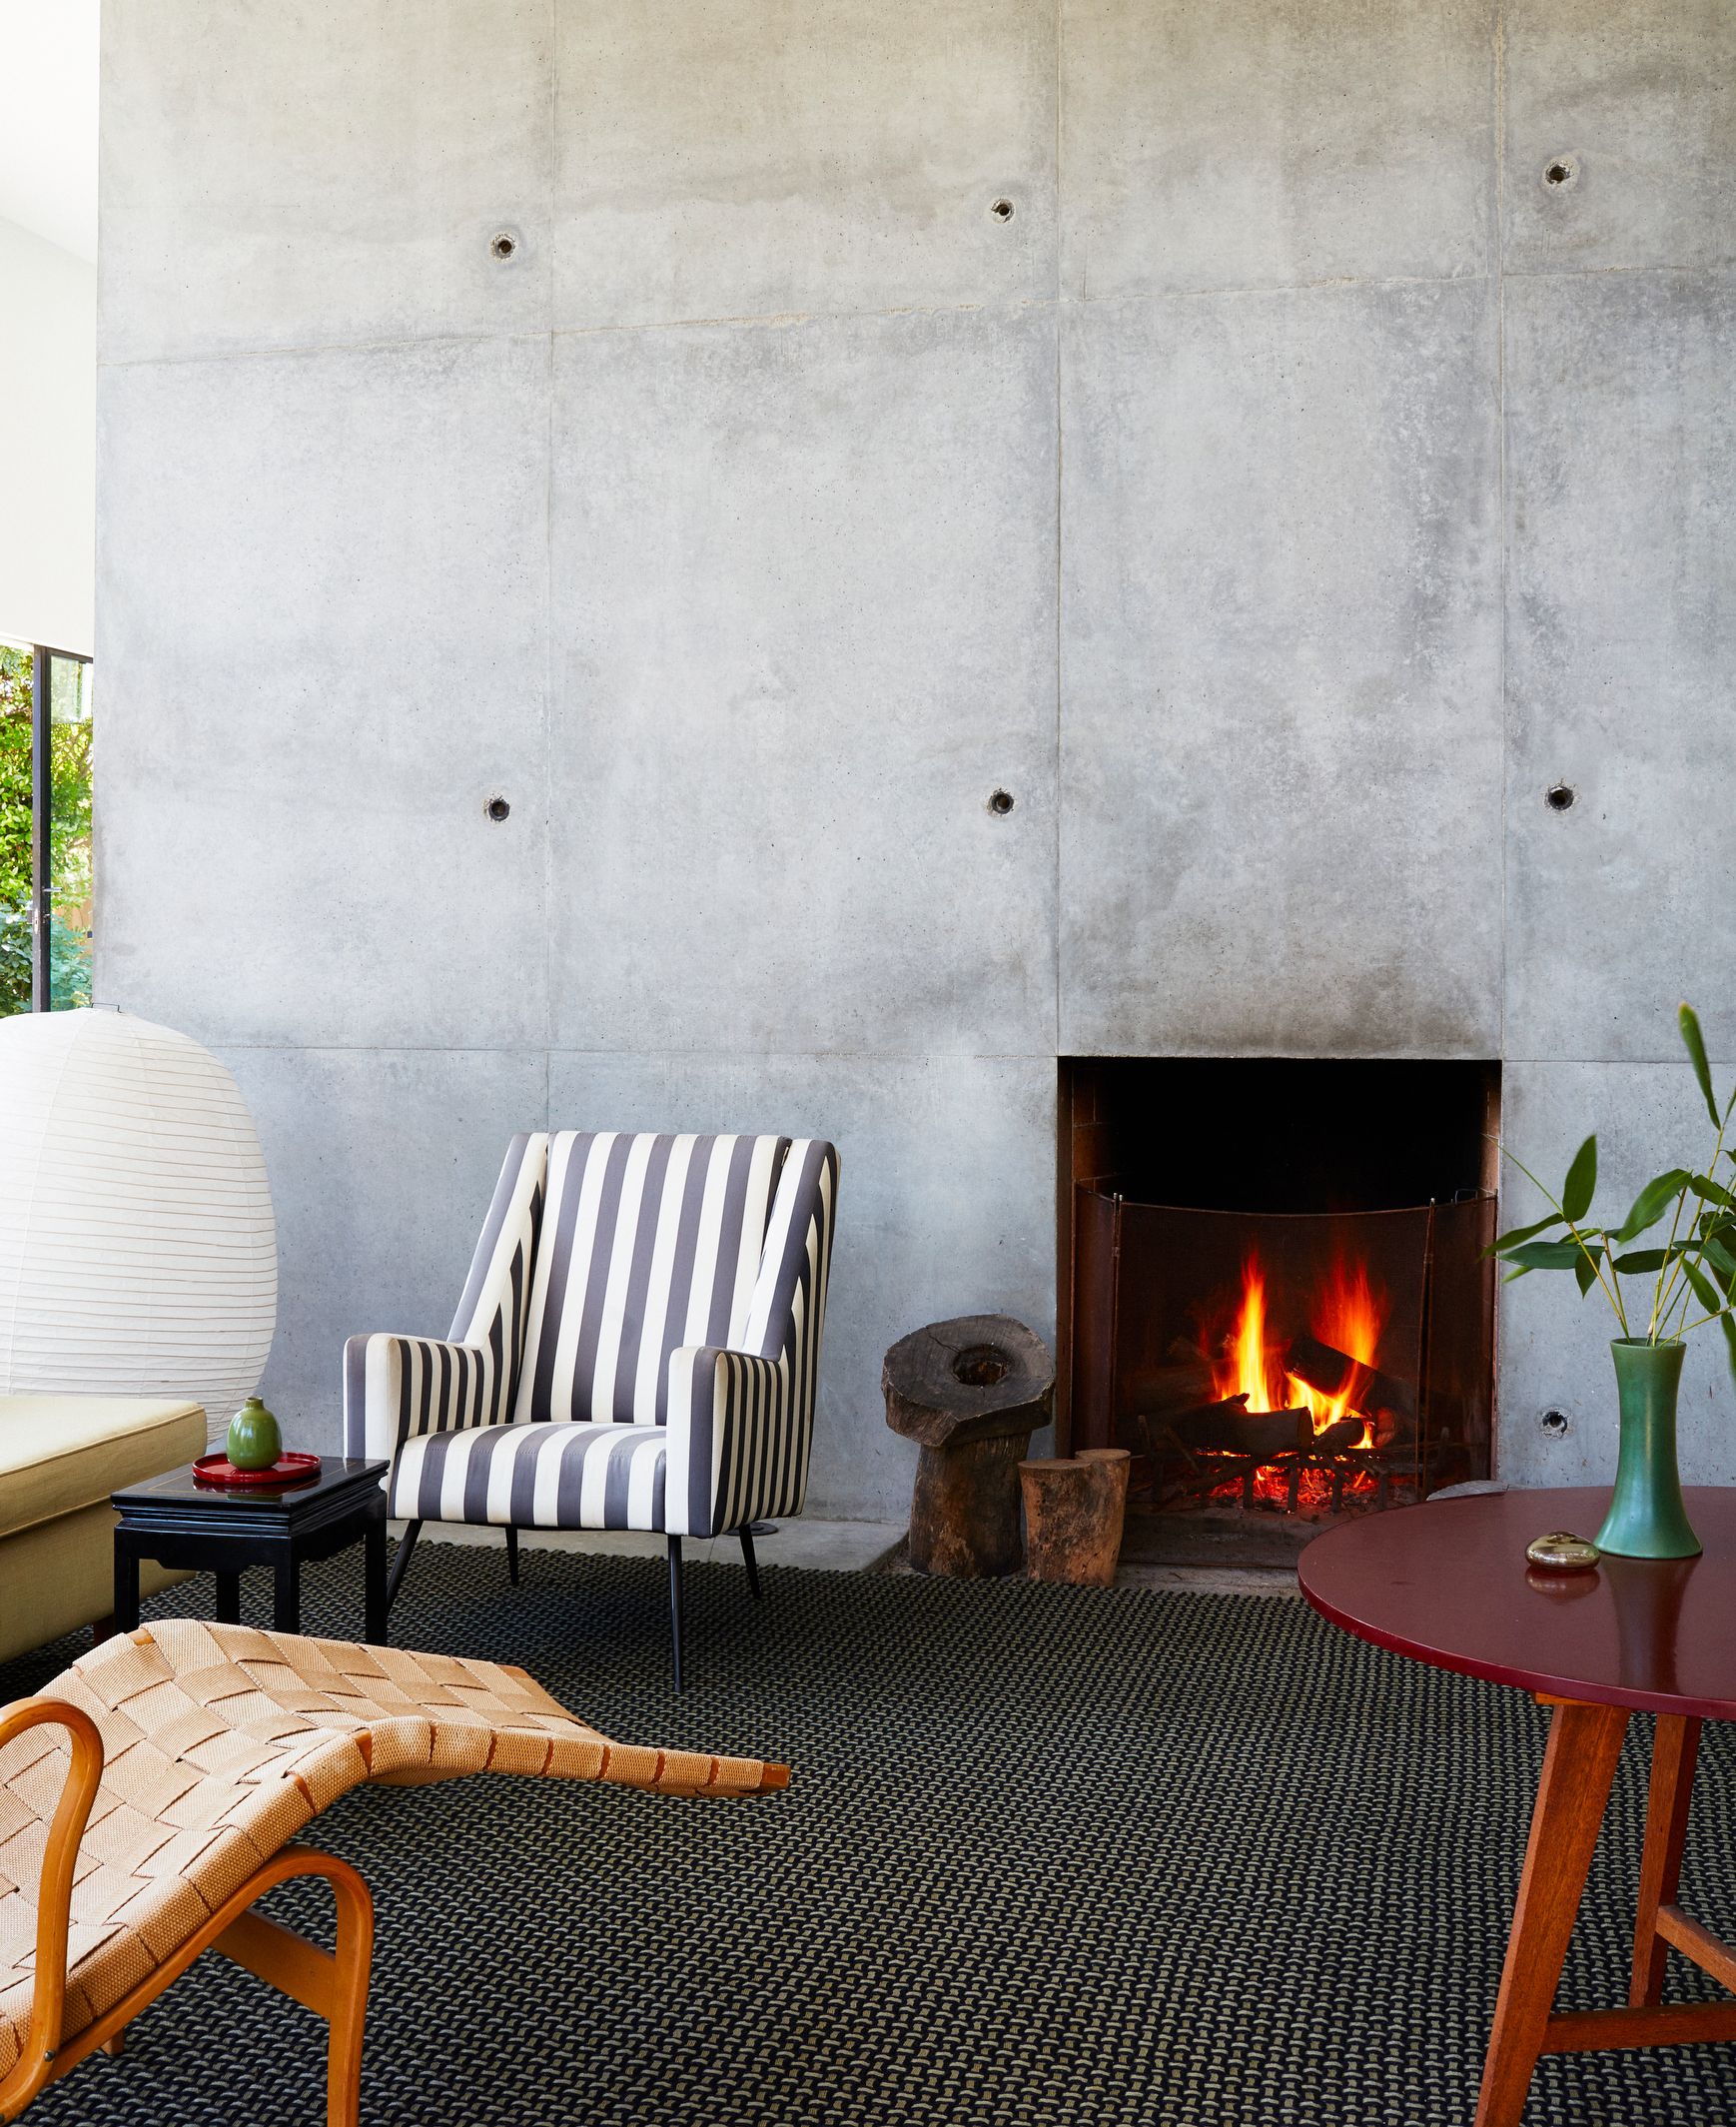 29 Cool Modern Fireplaces - Stylish Design Ideas For Modern Fireplaces